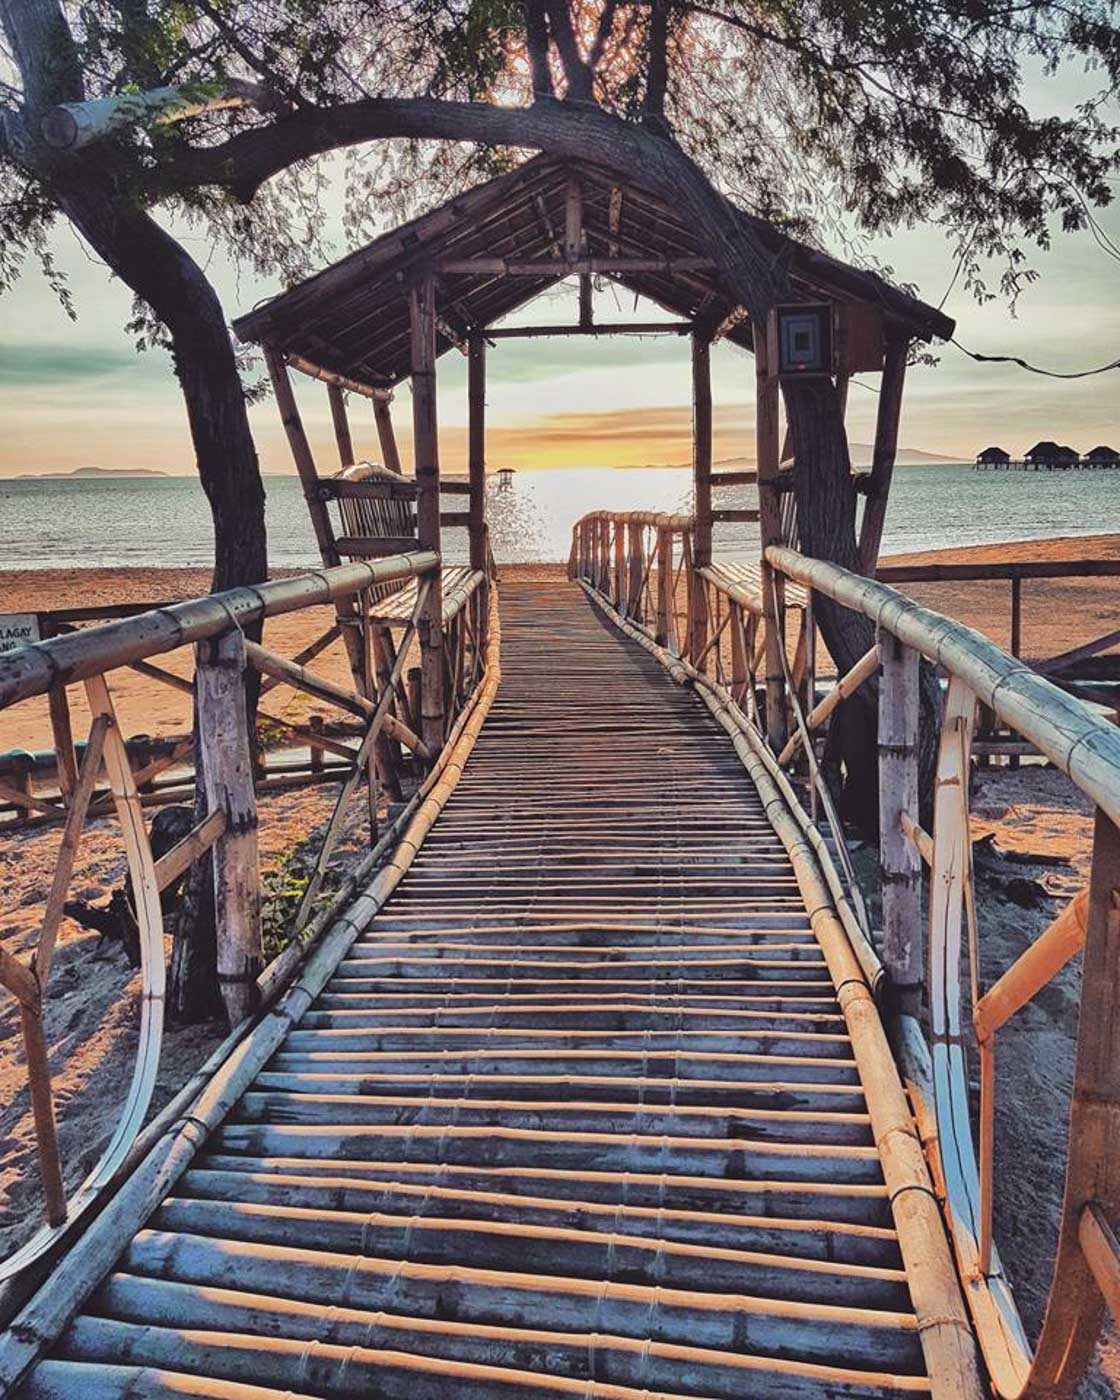 BAMBOO BRIDGE. At Manuel Uy Resort, there is a bamboo bridge and hut, the earlier good for crossing during high tide. Photo by Jay Vasquez 